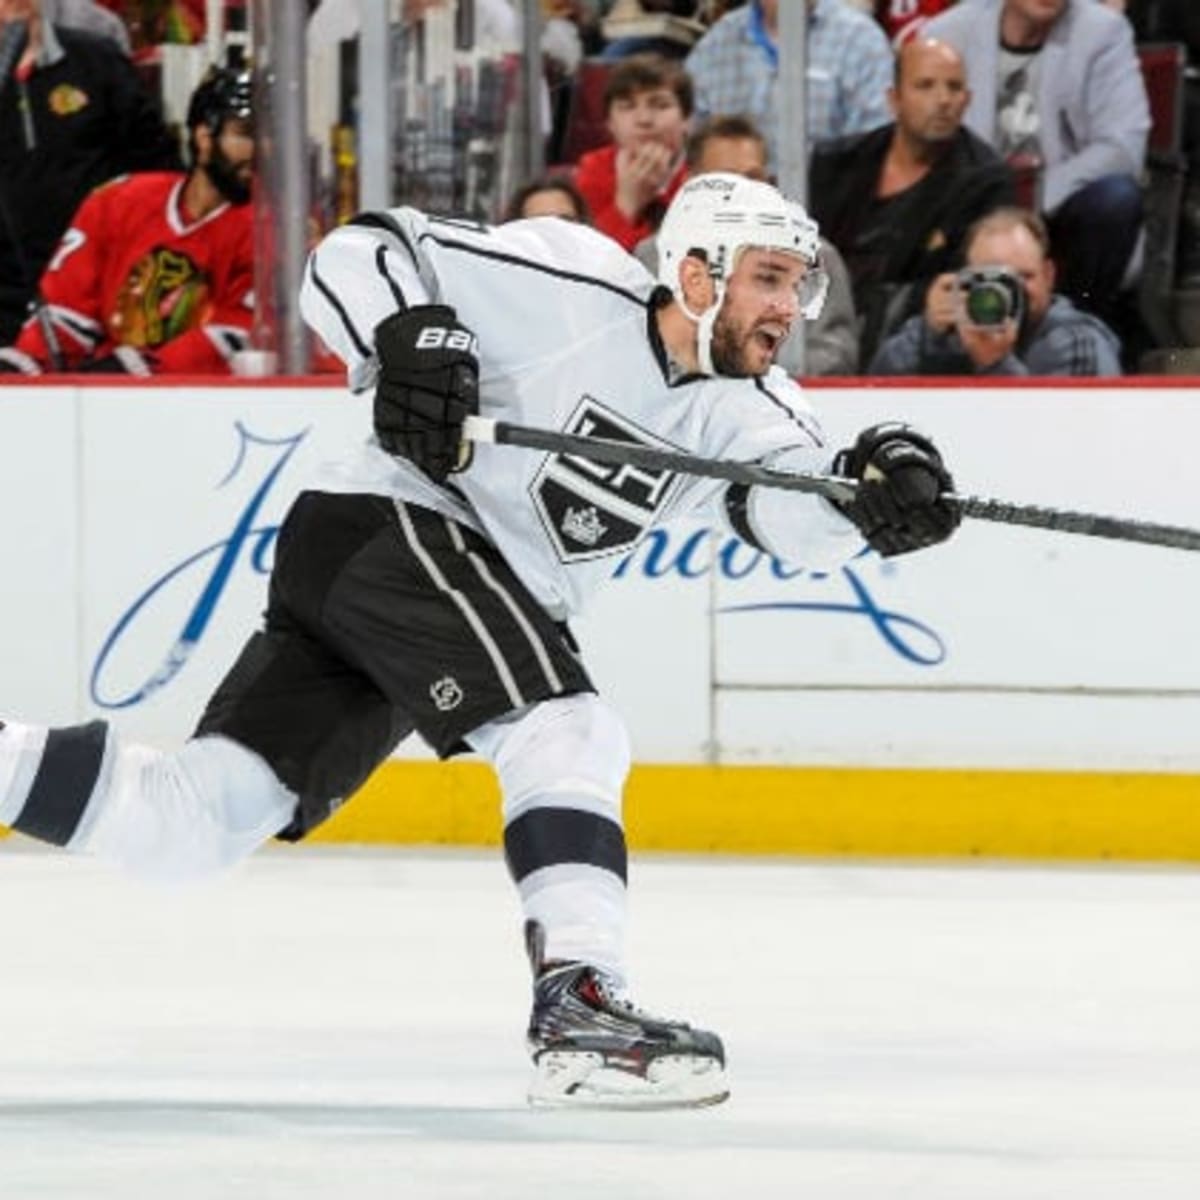 Alec Martinez not close to returning because “they nearly cut his